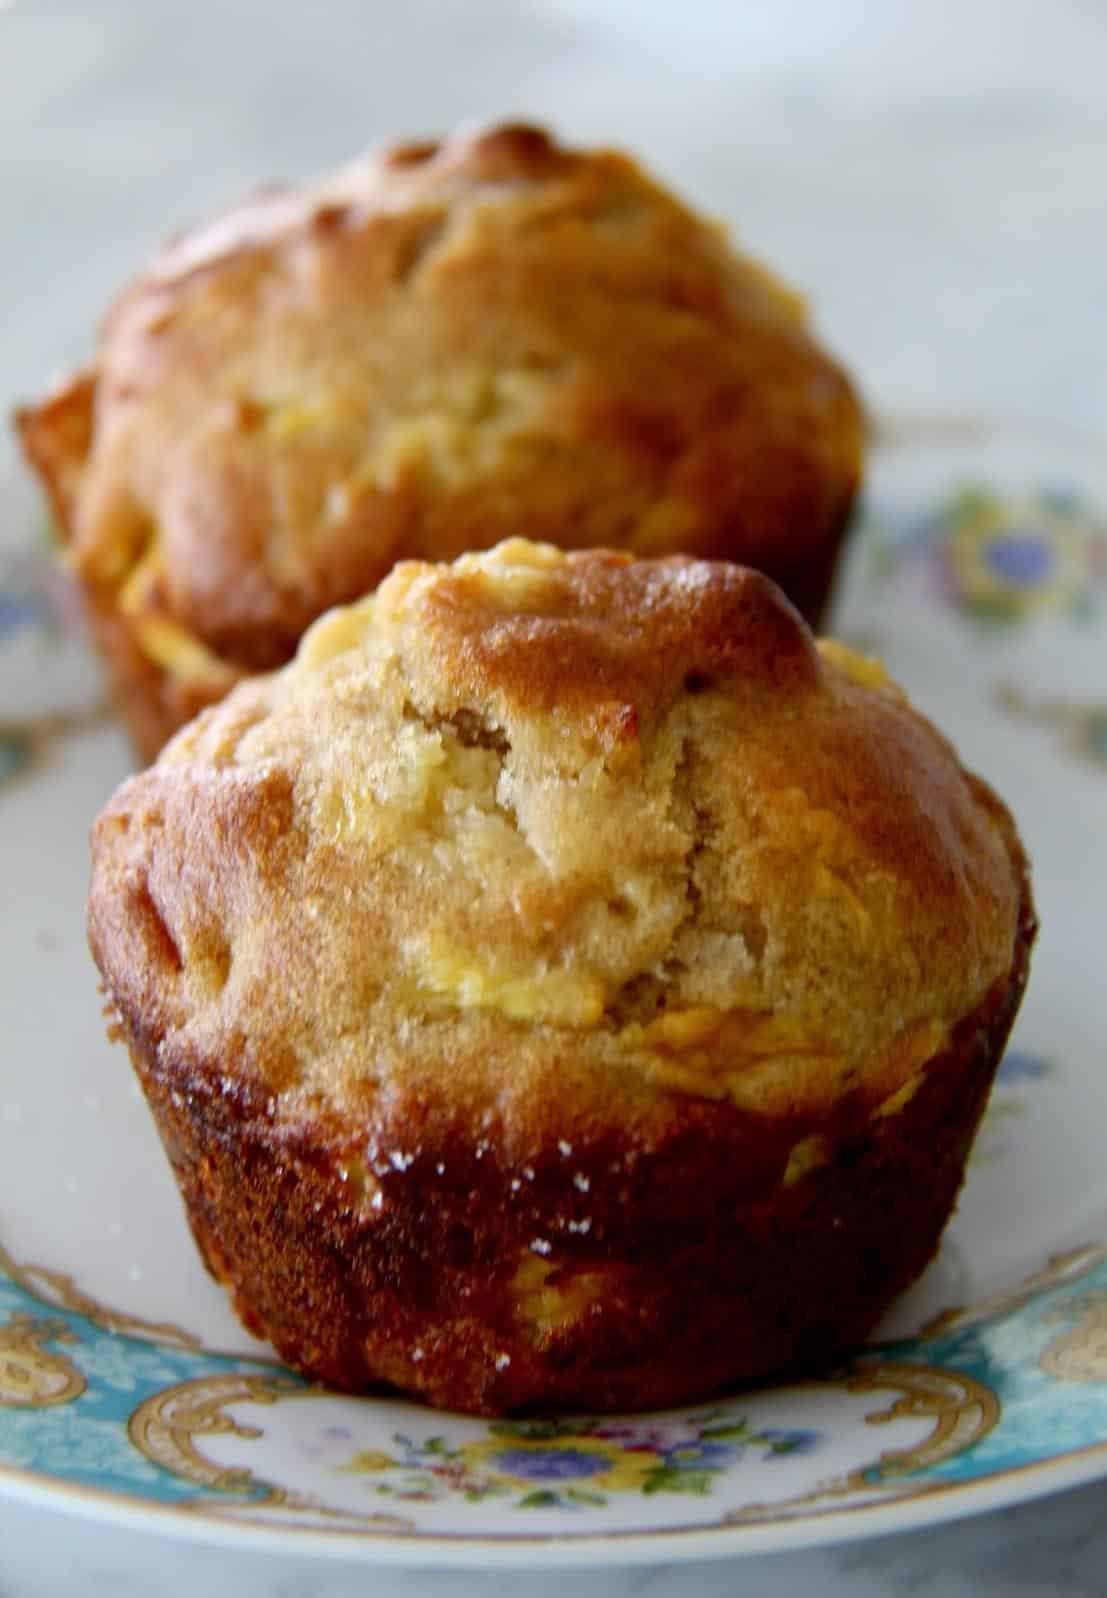  Get ready to sink your teeth into these scrumptious muffins.